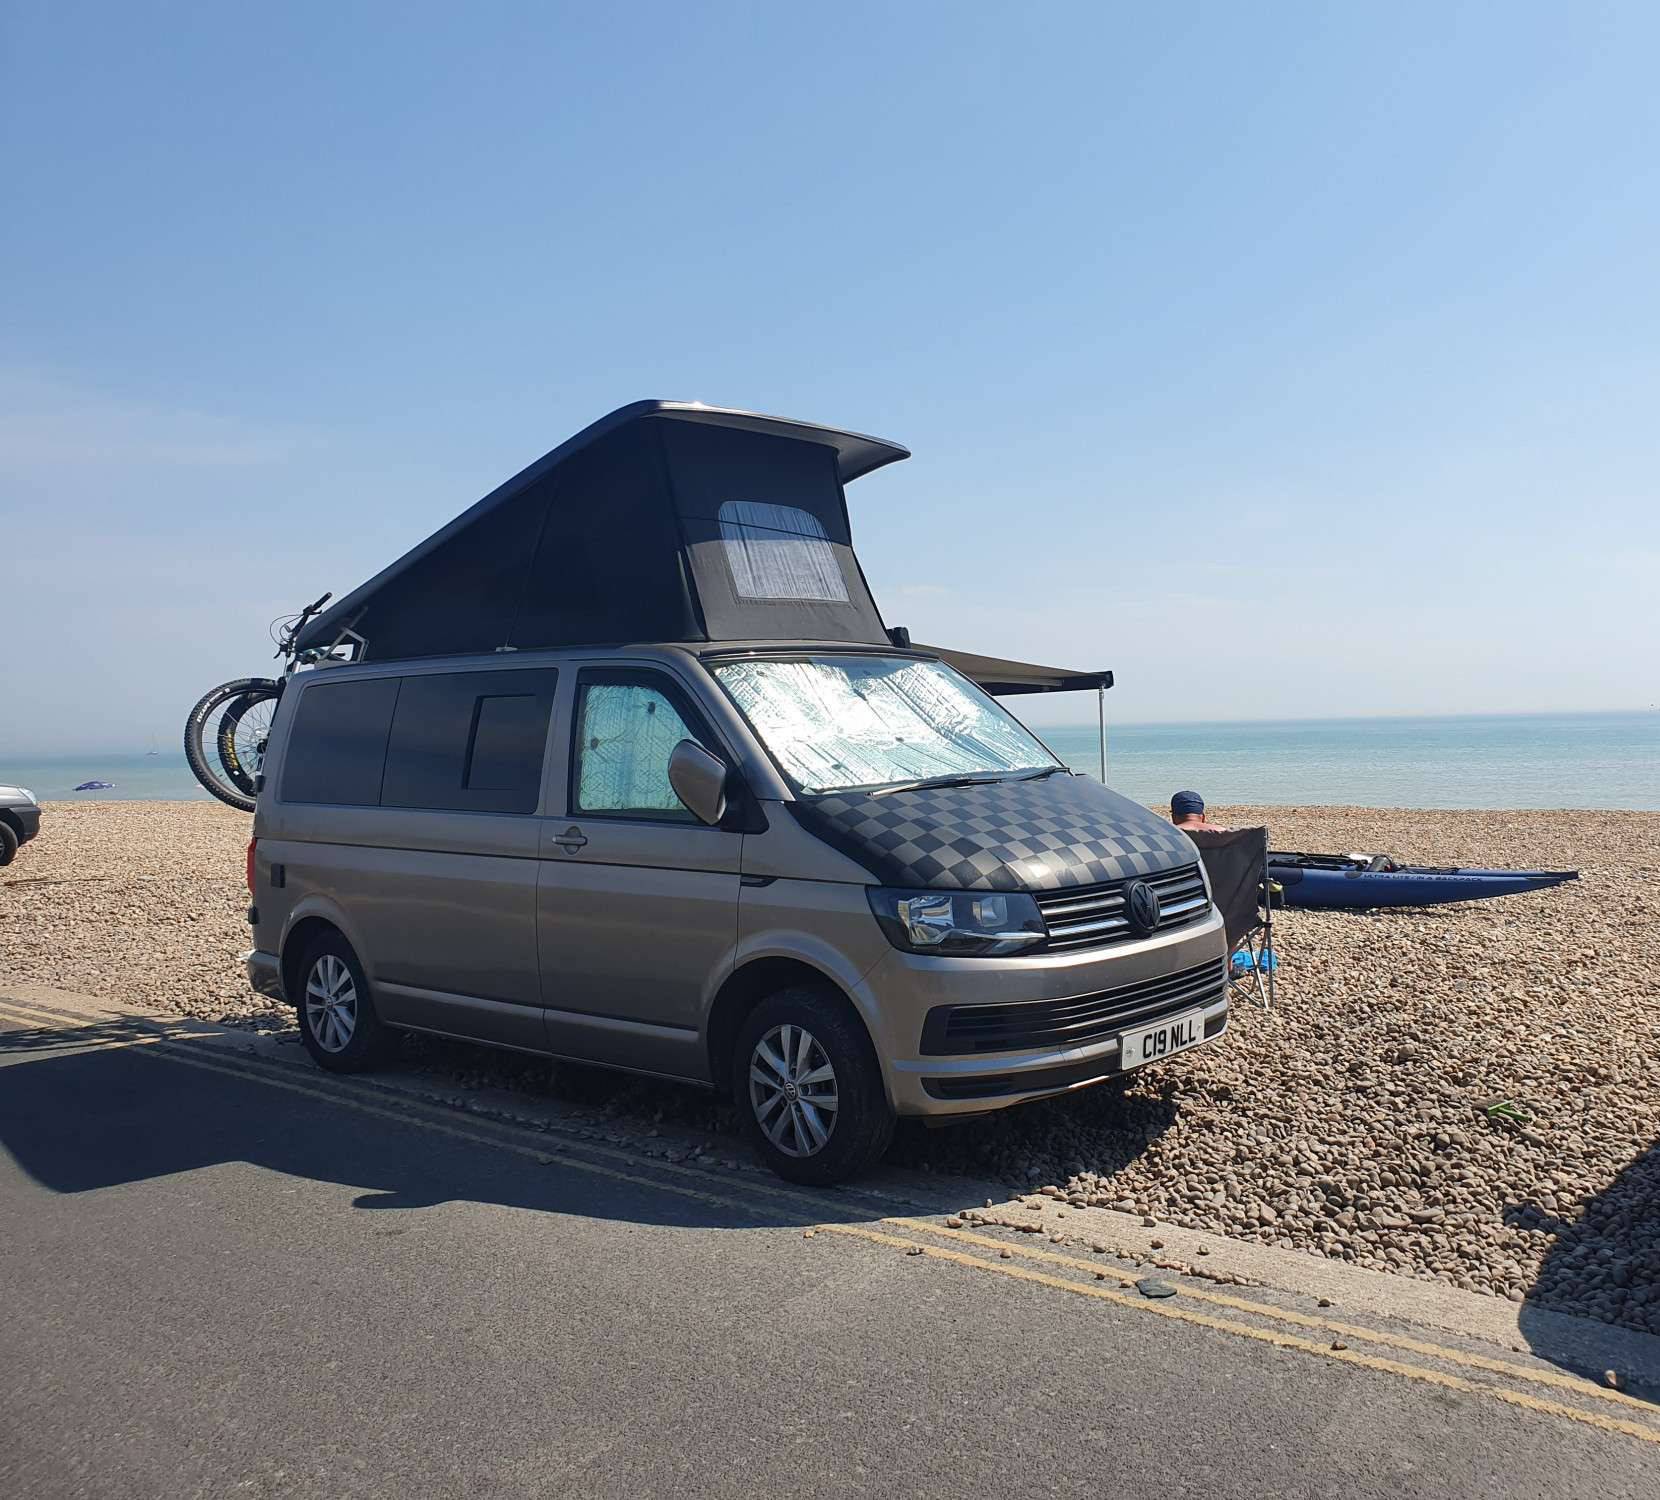 A  Campervan called Little-Lottie and  for hire in Leatherhead, Surrey